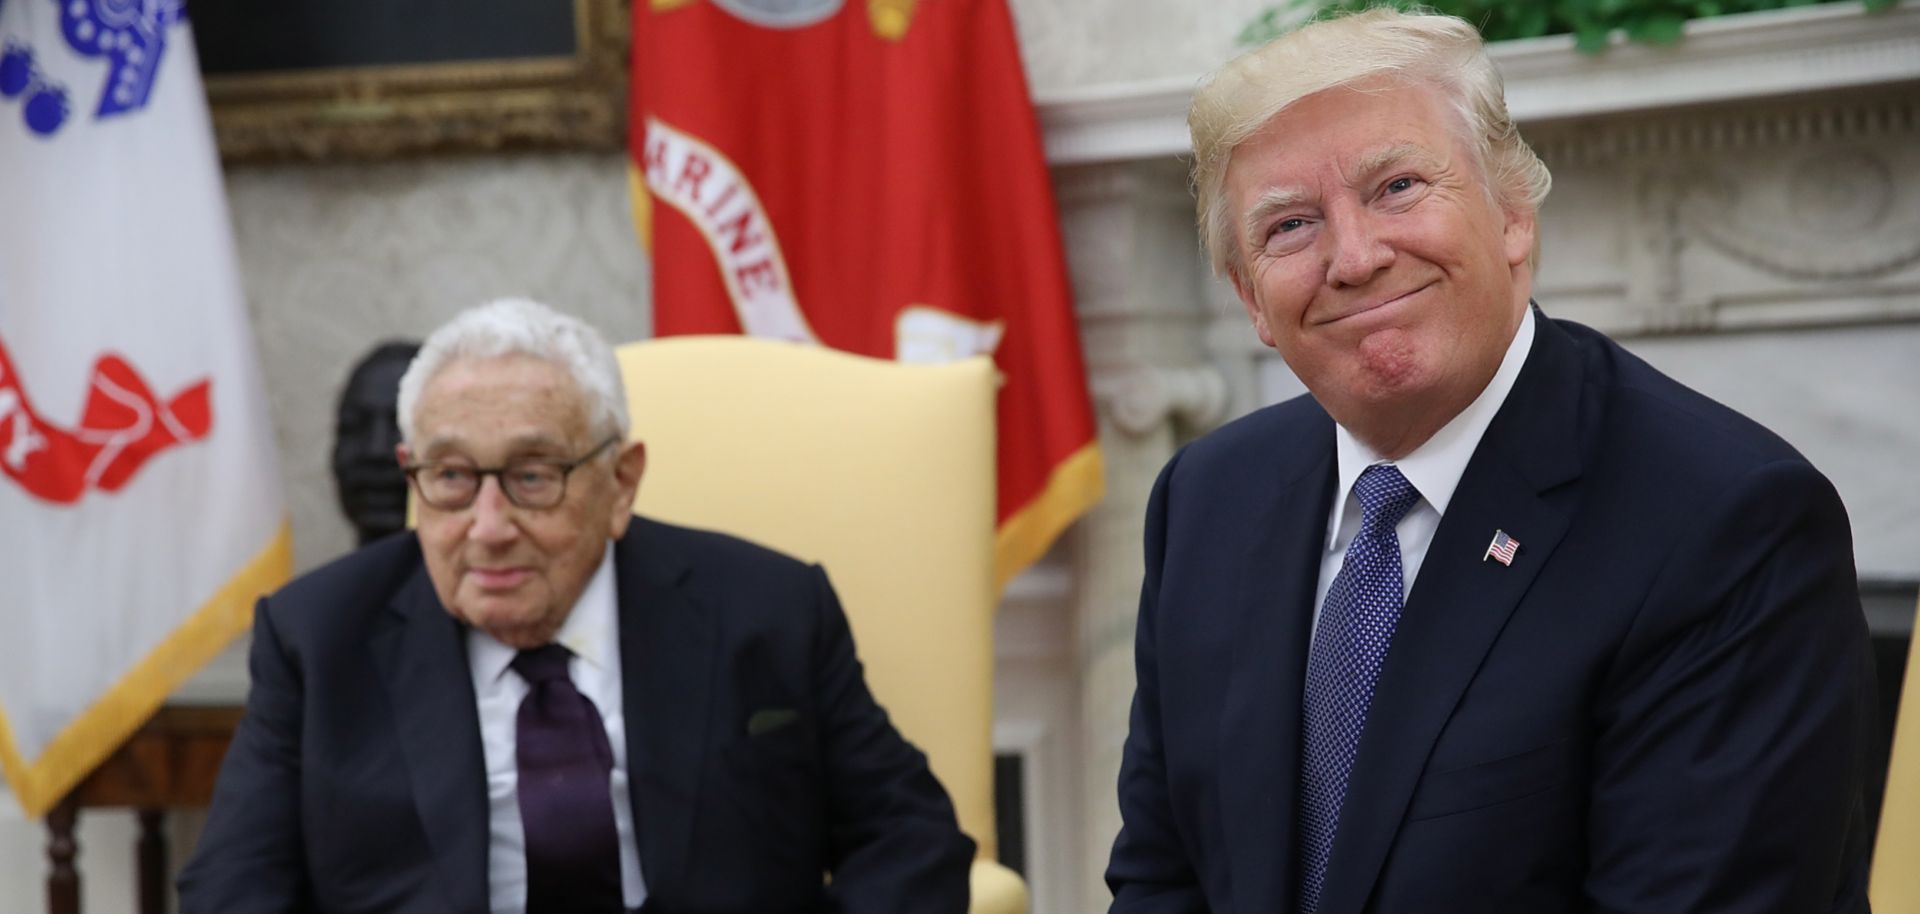 U.S. President Donald Trump (R) meets with former U.S. Secretary of State Henry Kissinger in the Oval Office in October 2017 in Washington.